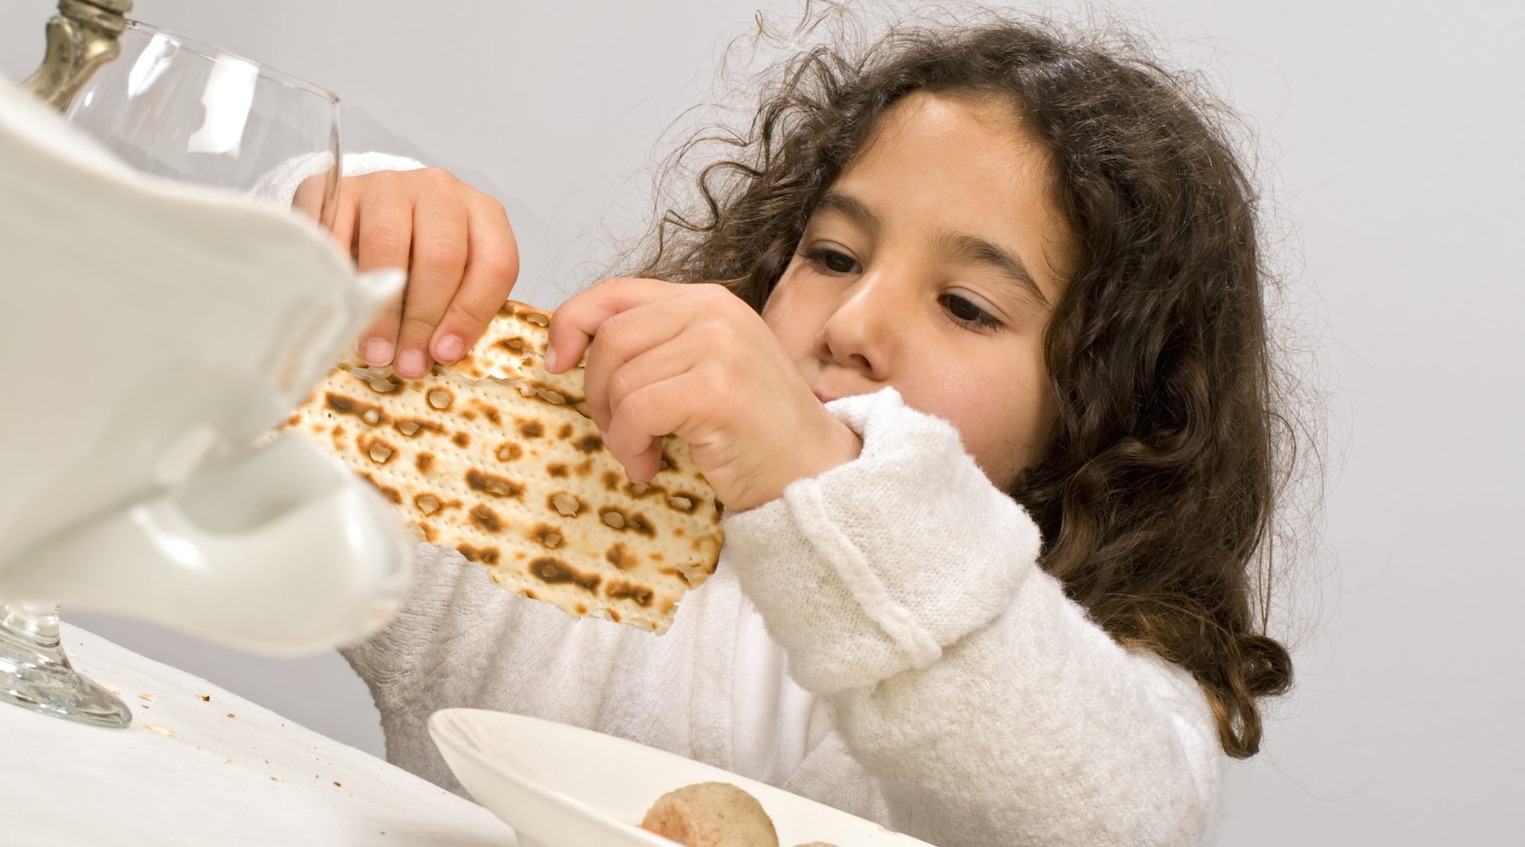 A young girl holds matzah at a Passover seder.